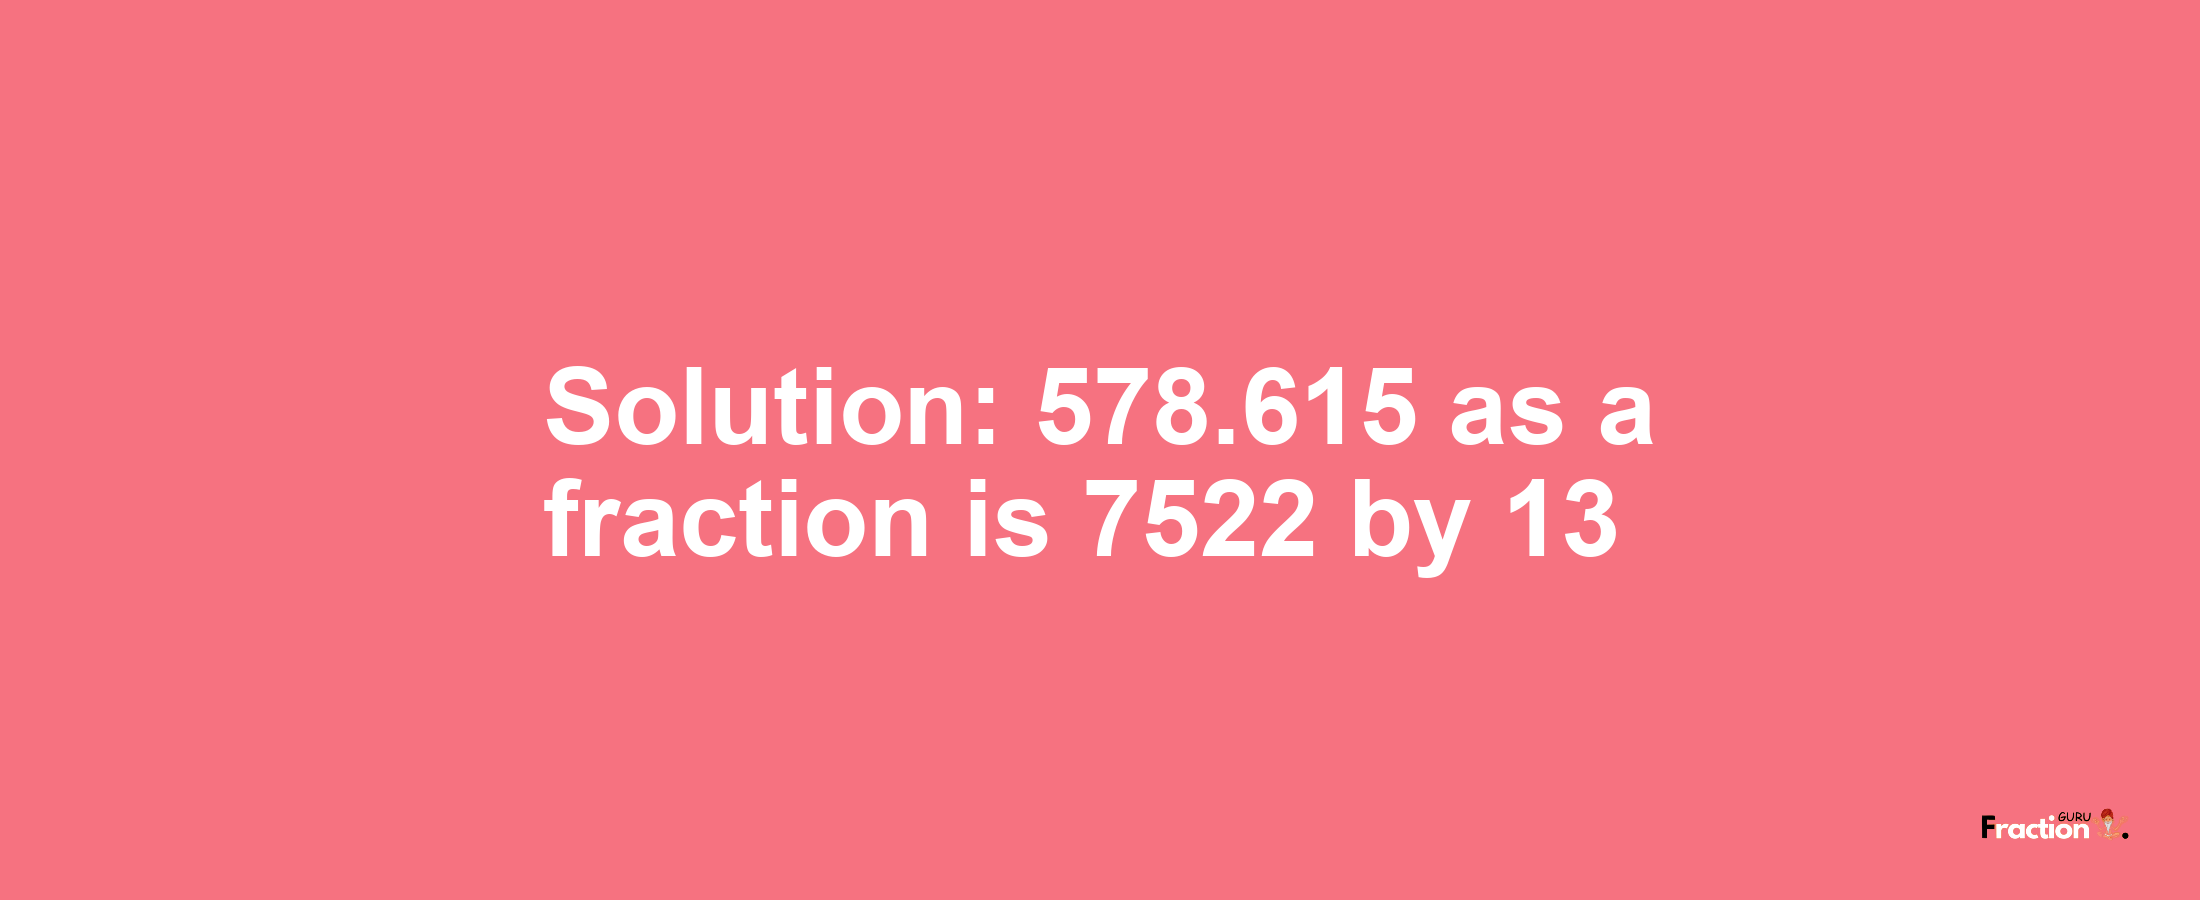 Solution:578.615 as a fraction is 7522/13